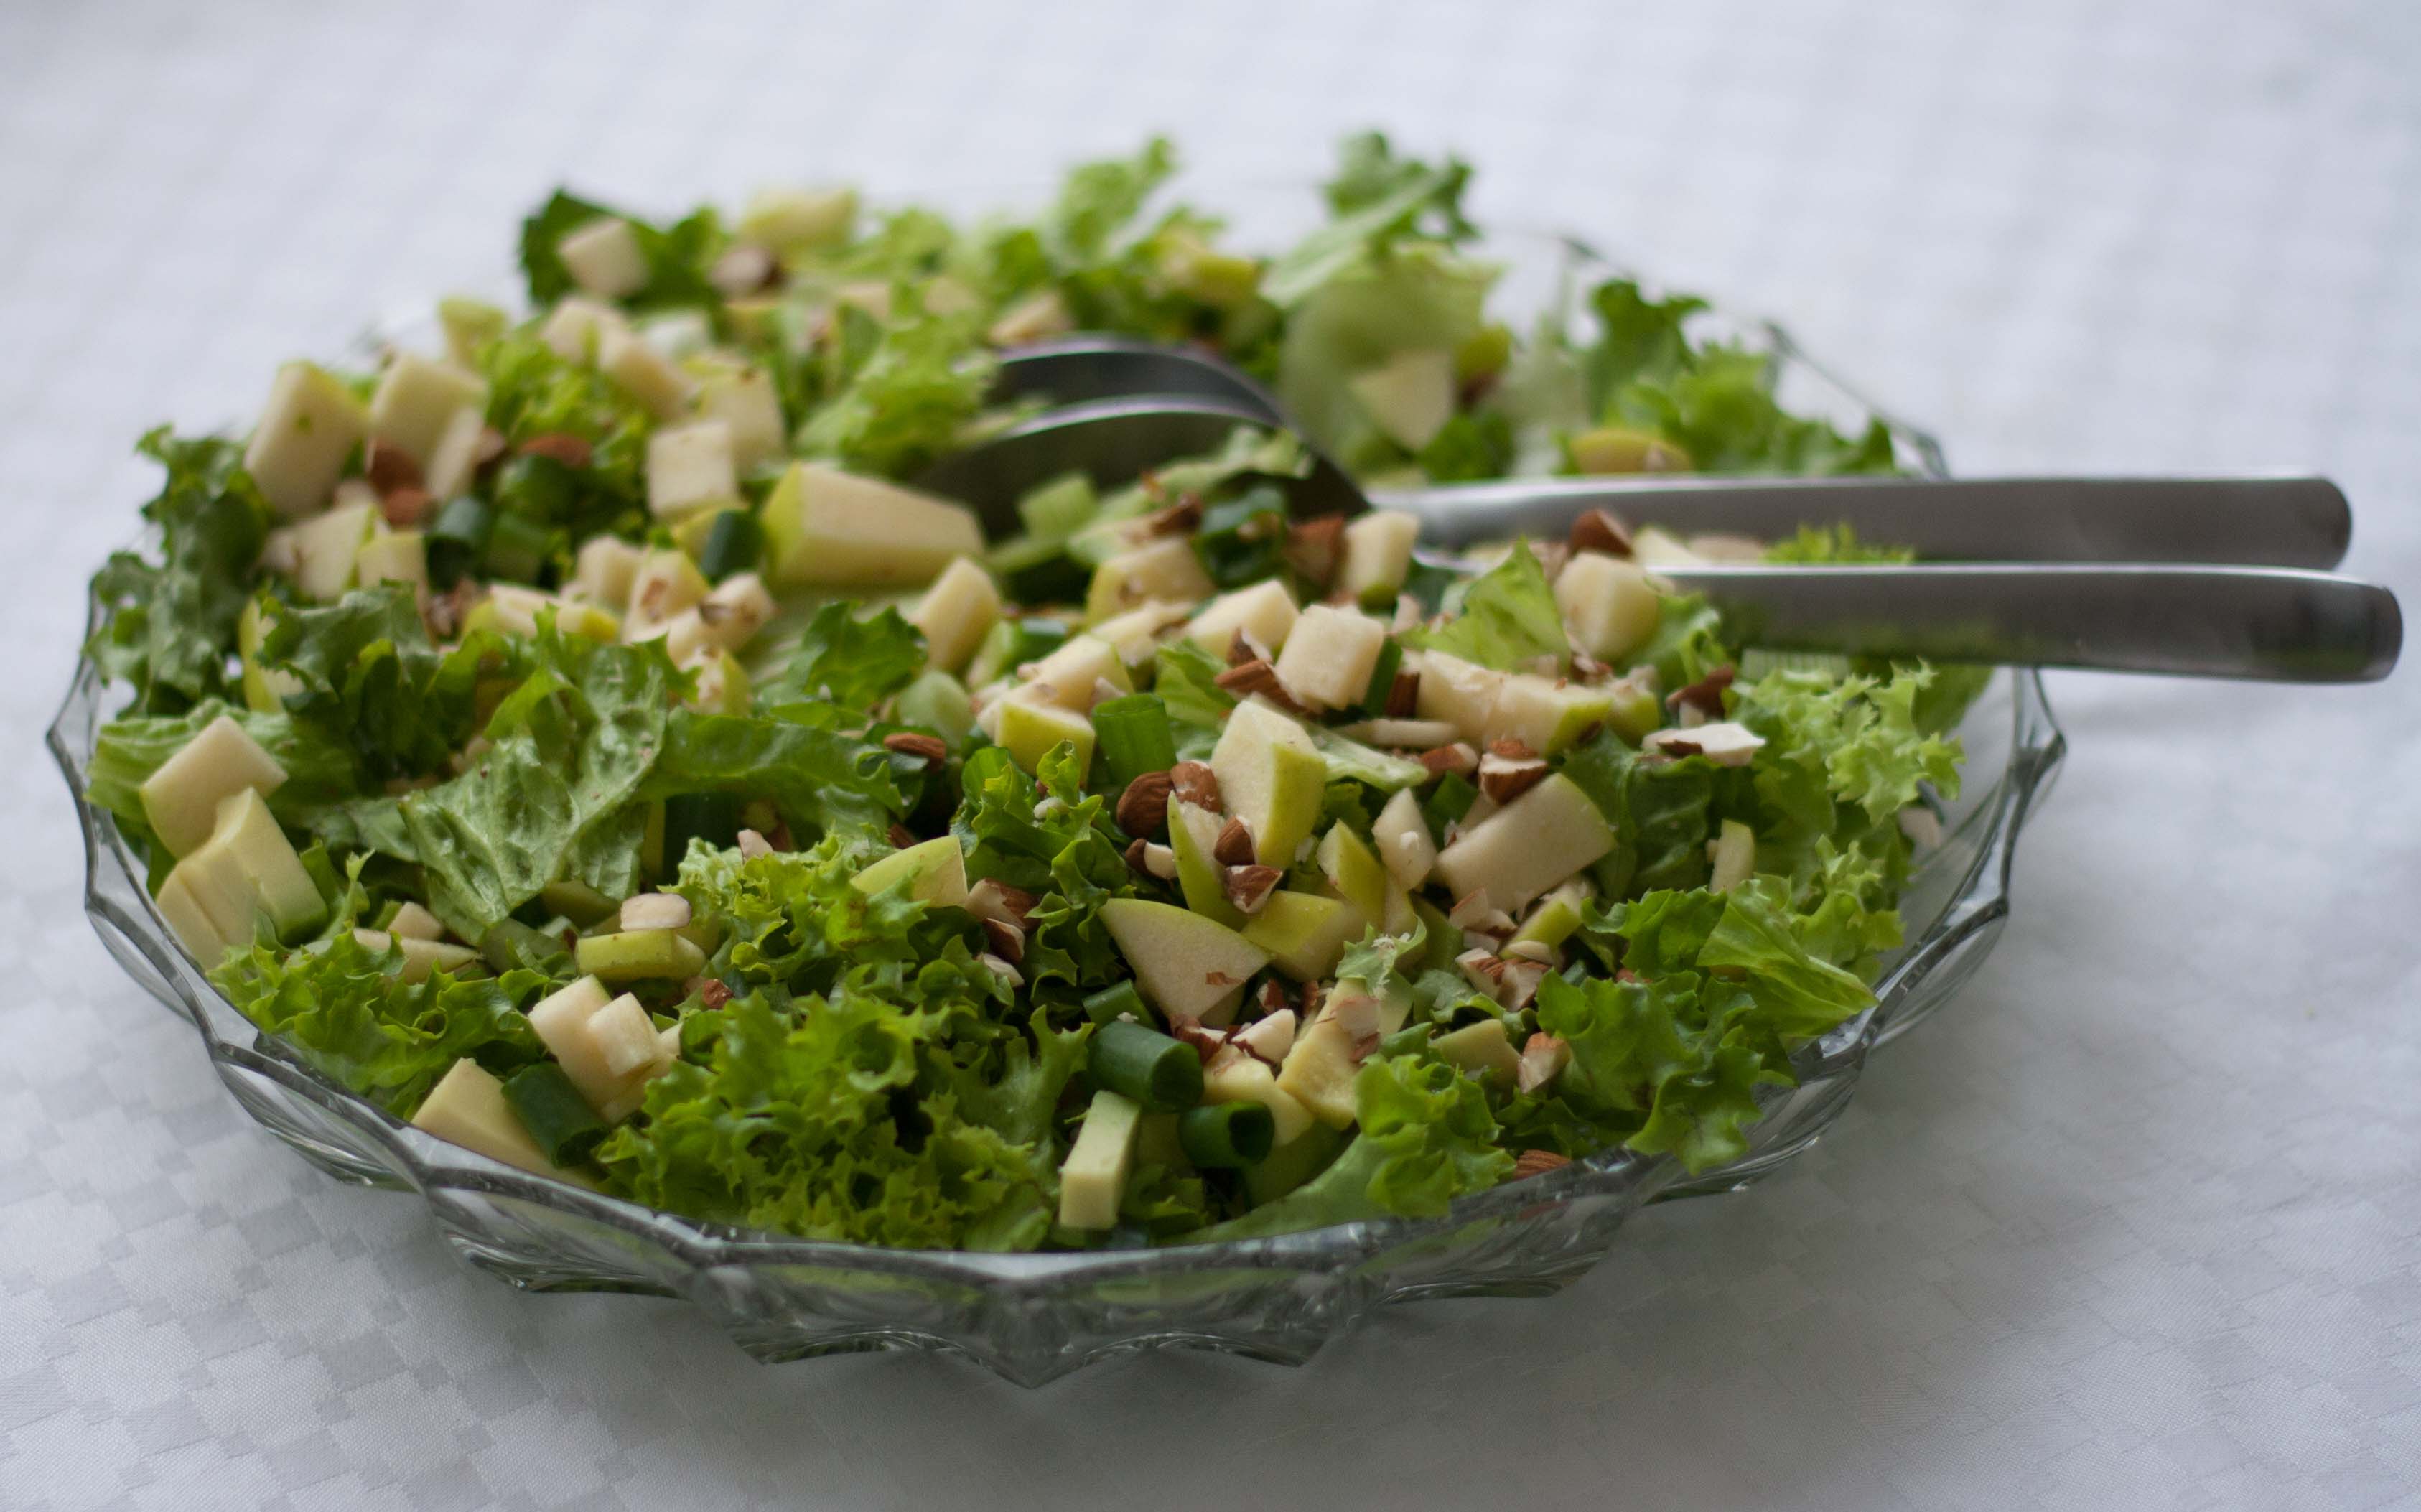 Recipe for Homemade and Simple Green Salad with Apples and Almonds